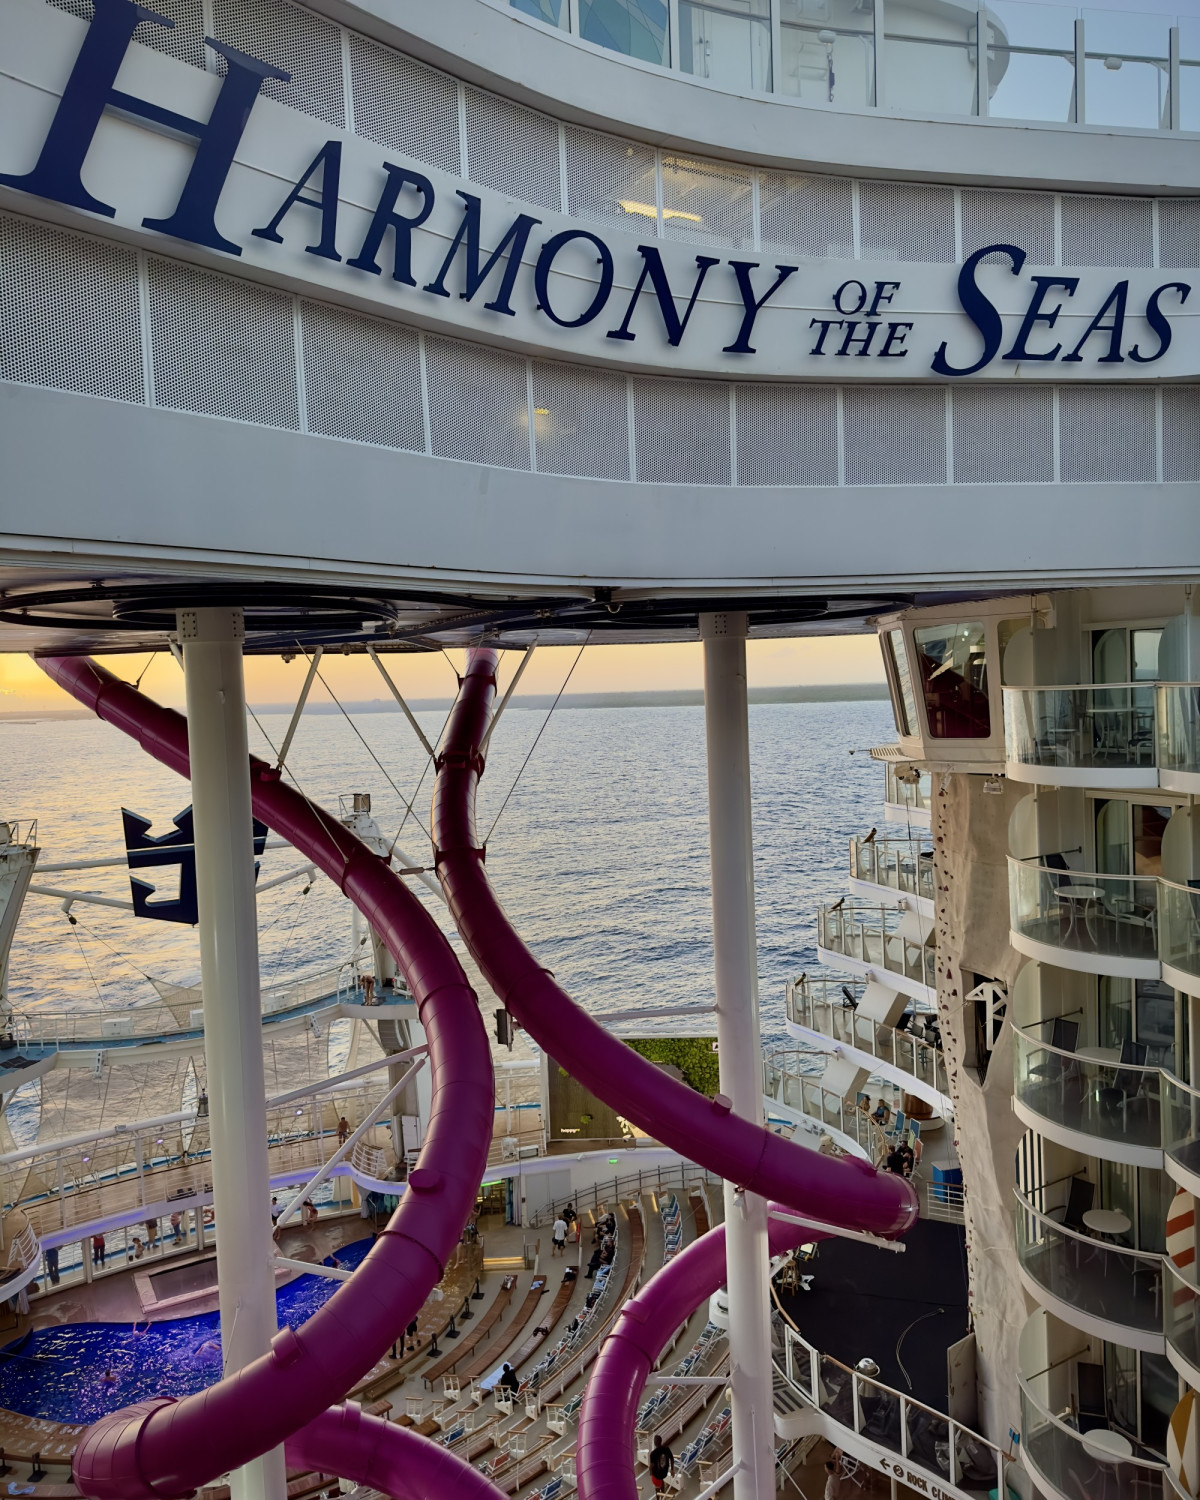 A sign reading "Harmony of the Seas" on a cruise ship